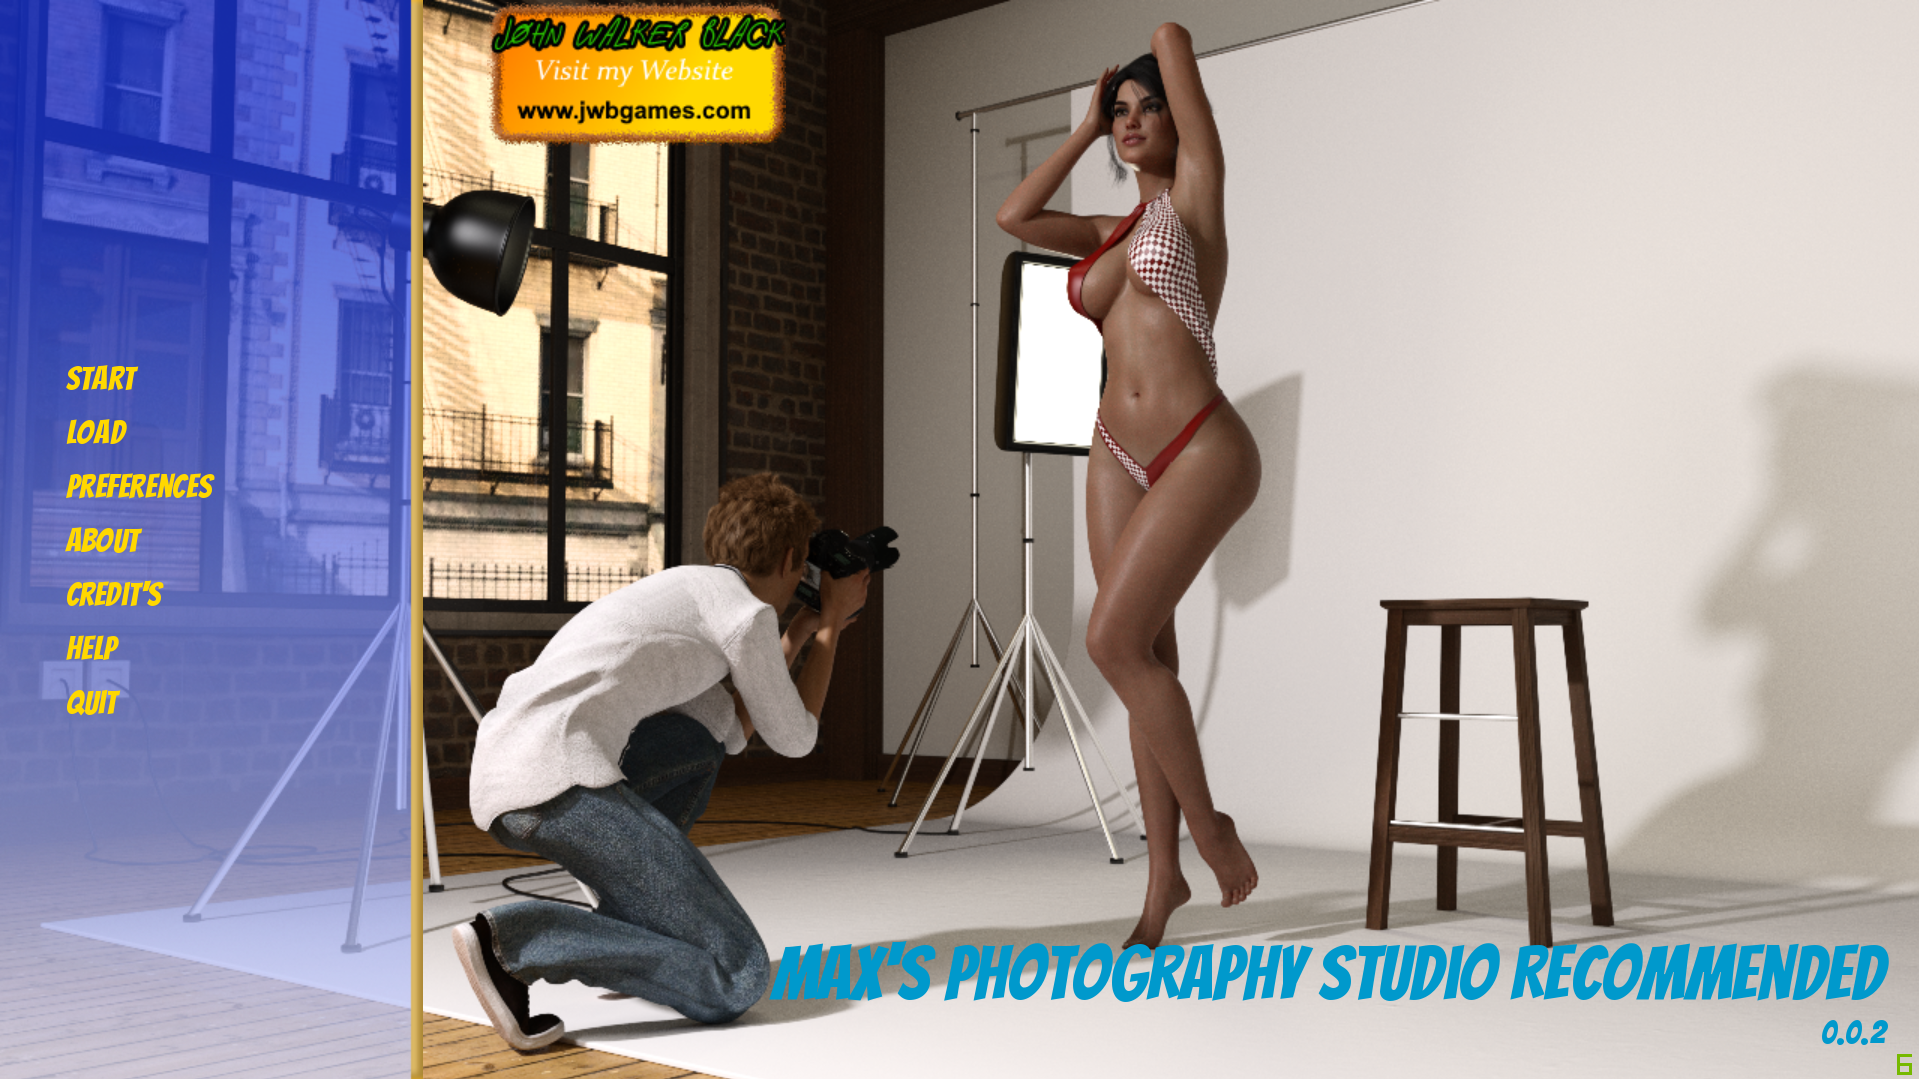 3dcg Nude - 3dcg porn games free download, svs, adult - Page 138 of 267 - xGames